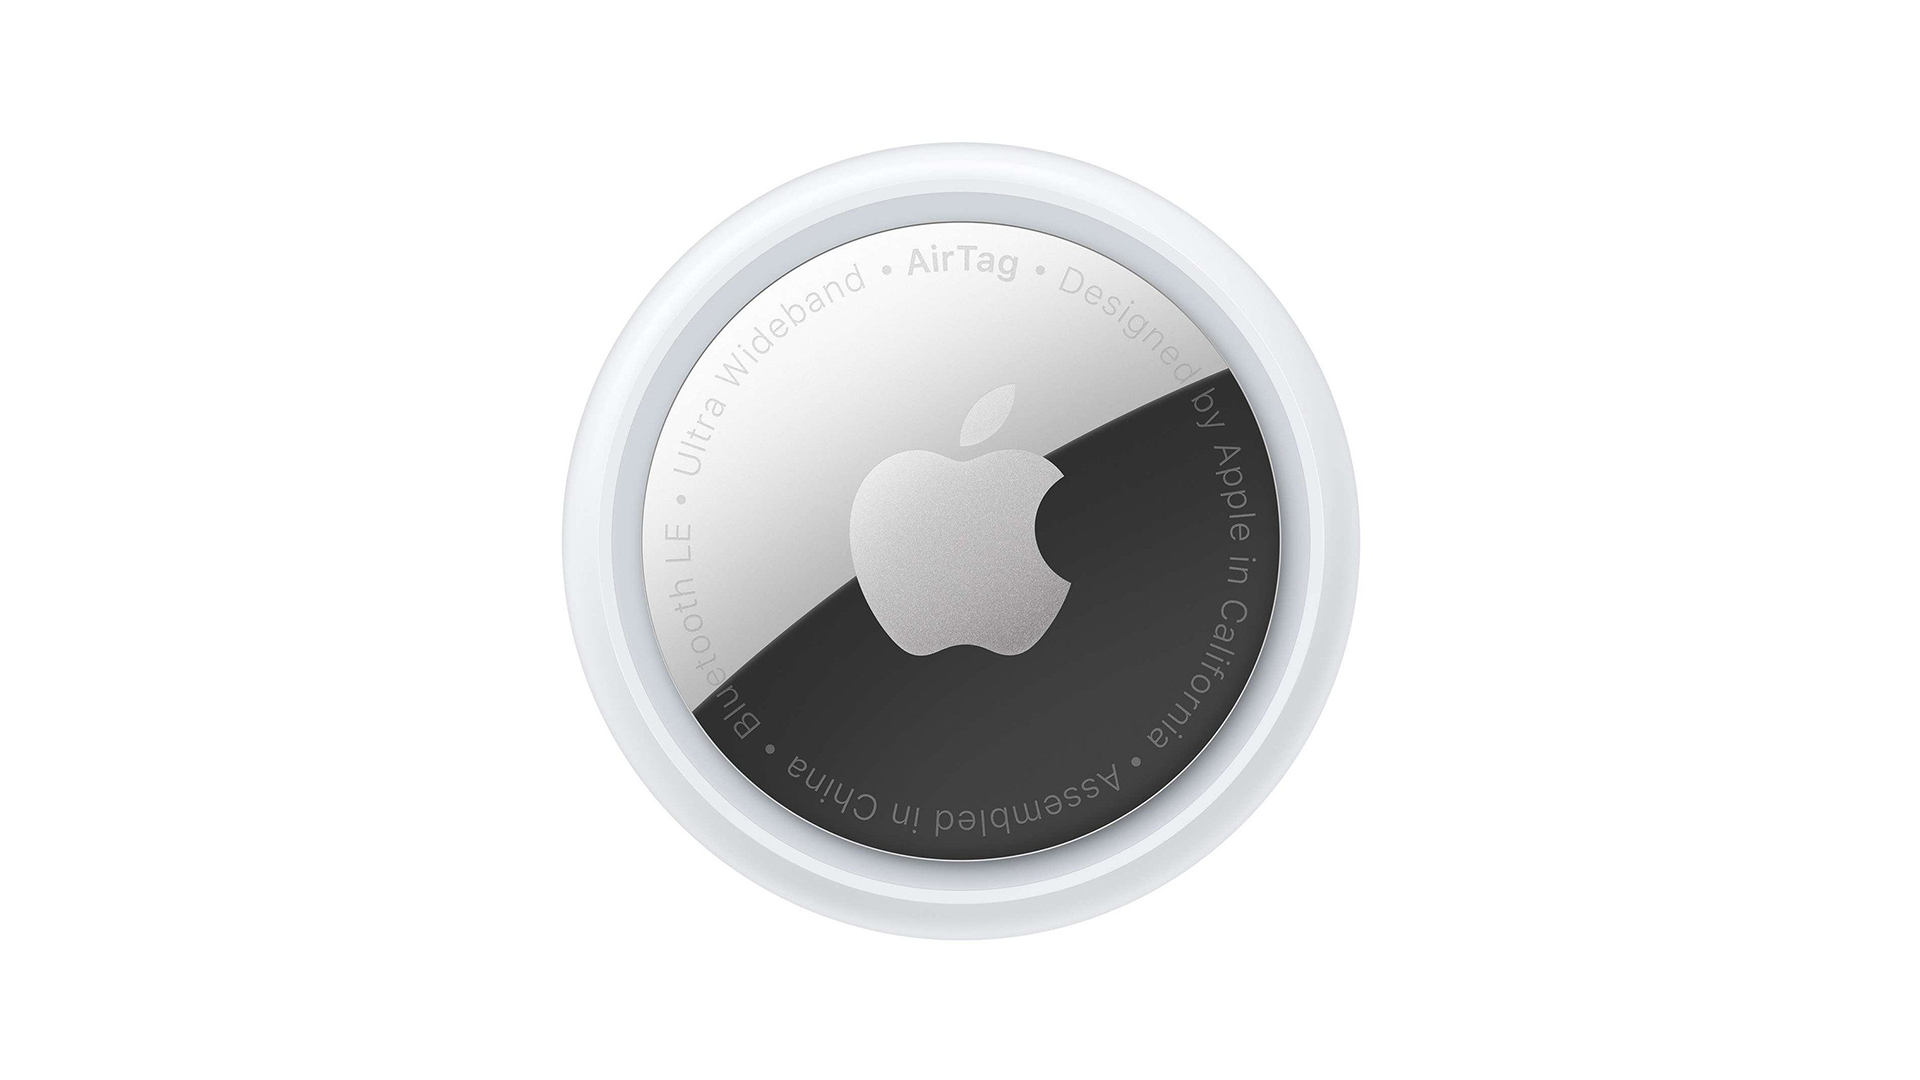 A single Apple AirTag – viewed from the side of the stainless steel battery cover.